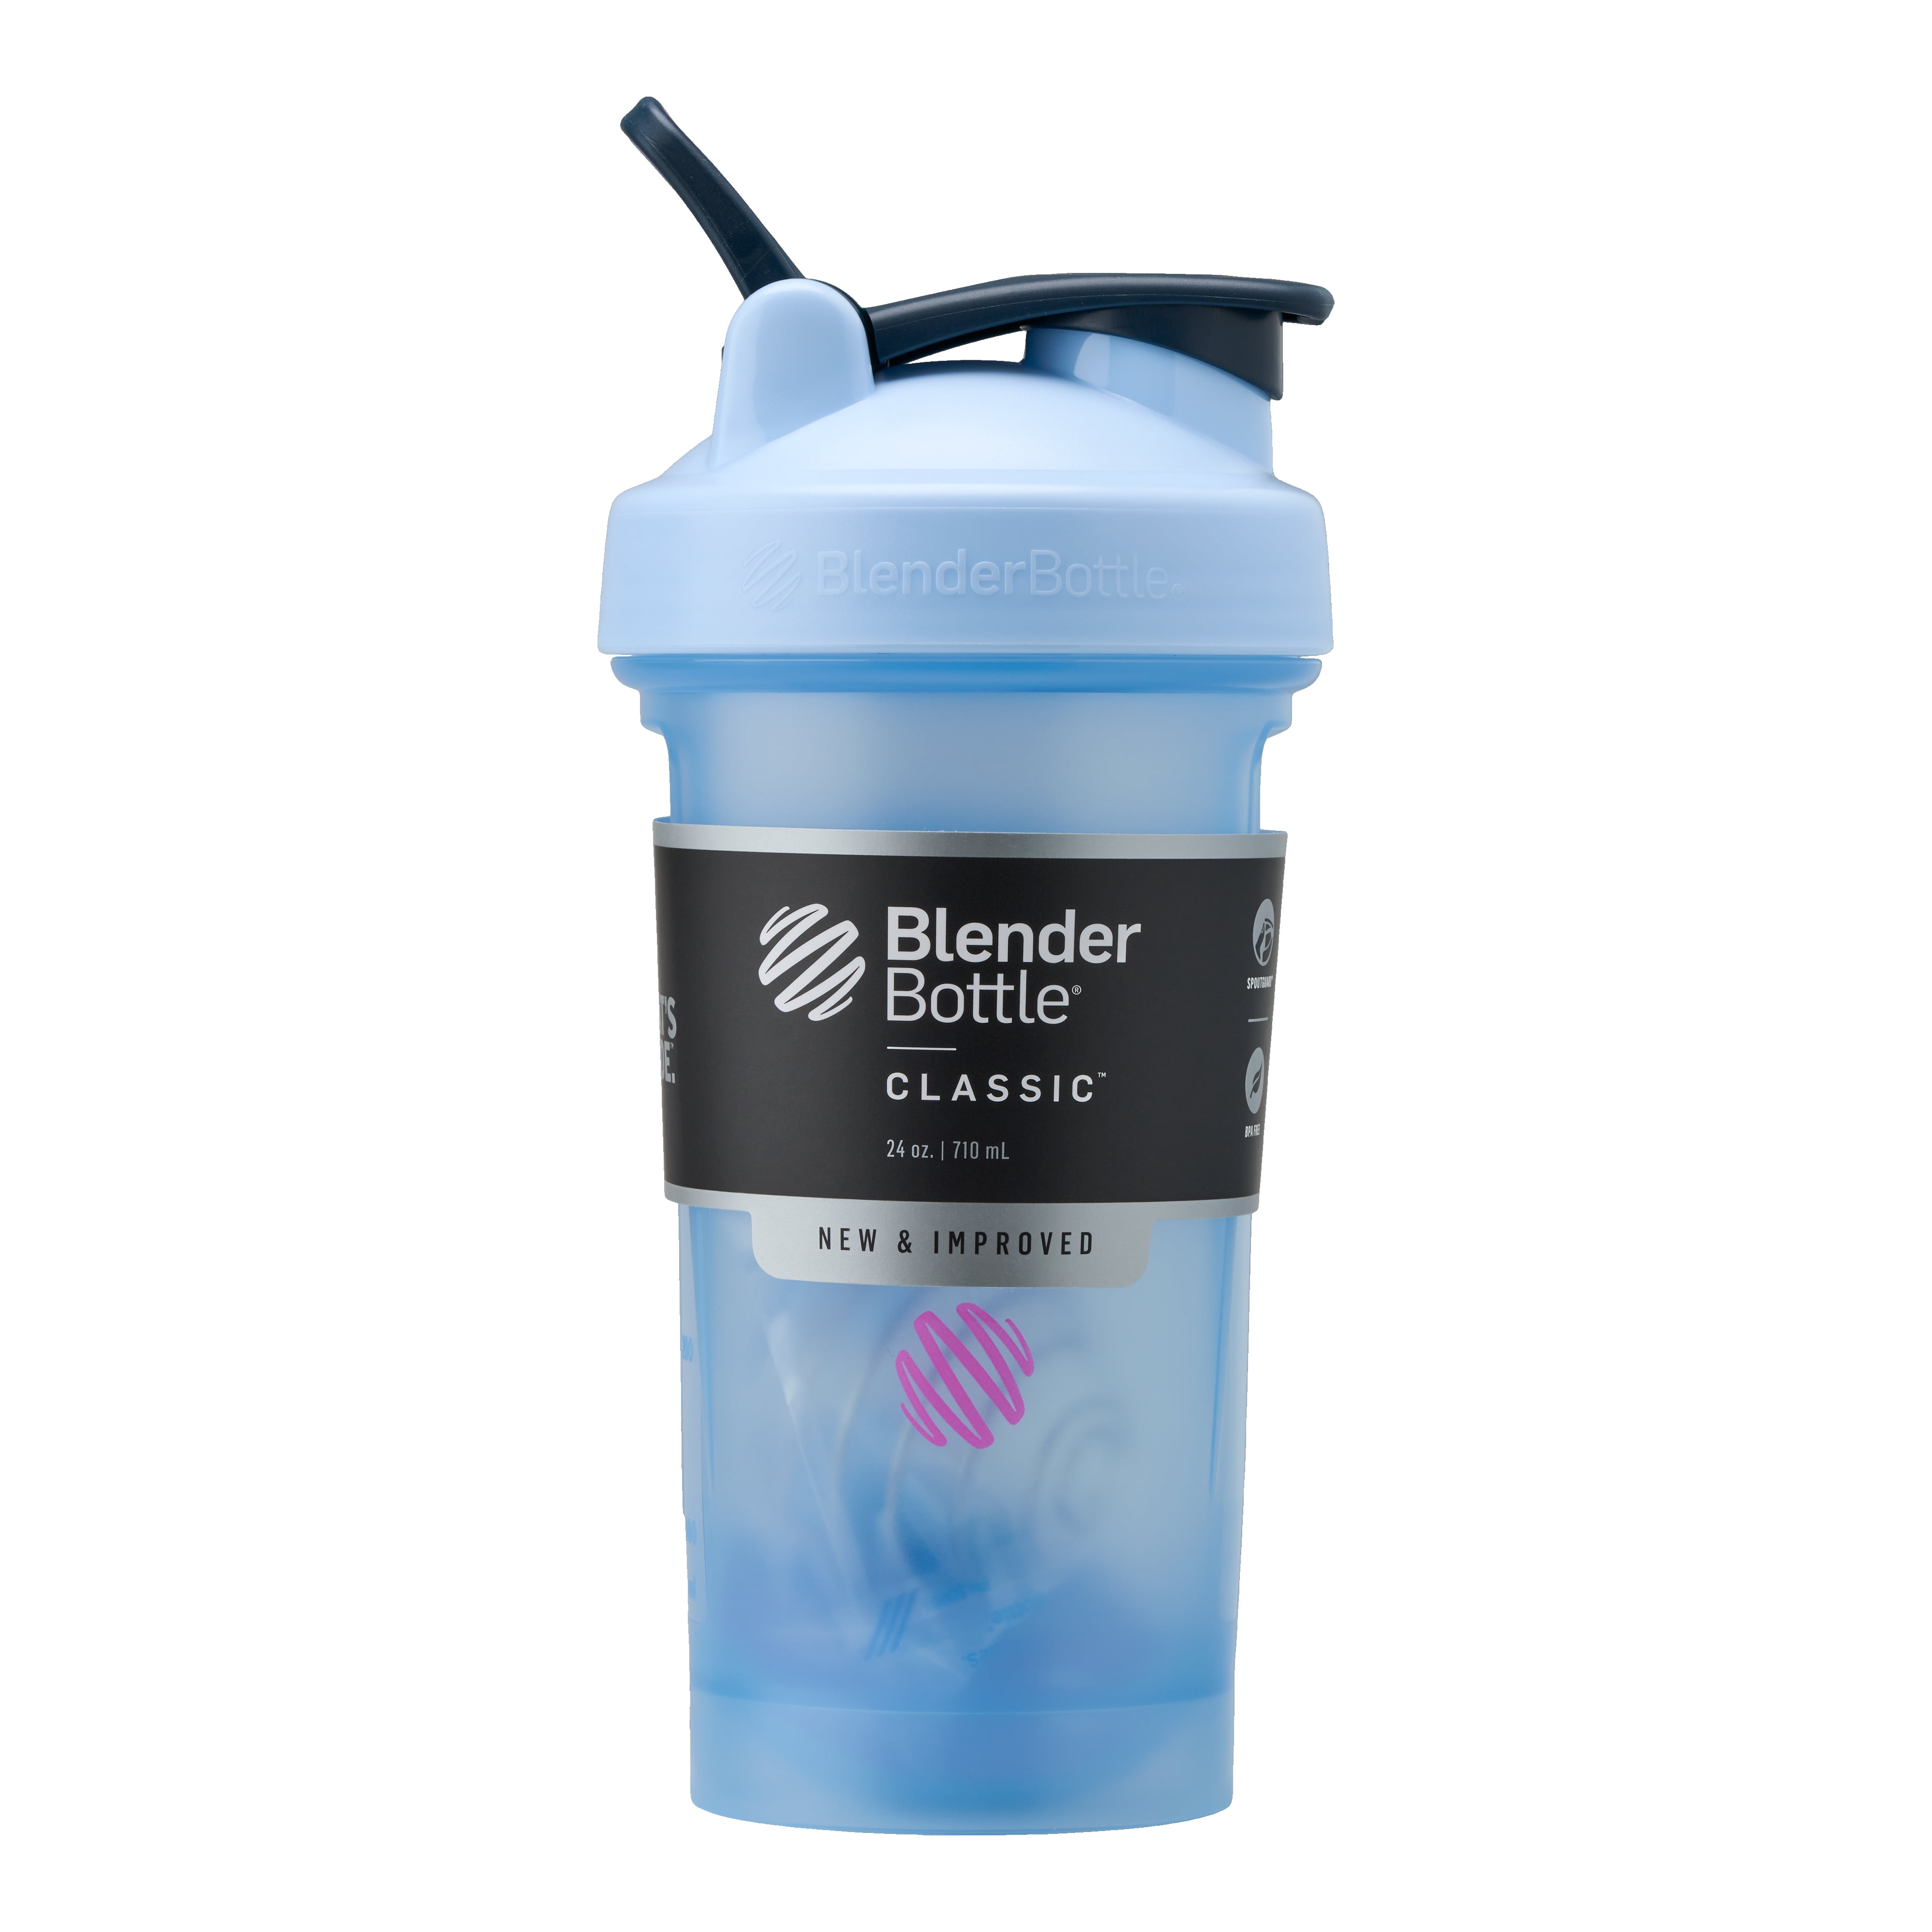 (3 COUNT) 24 OZ KOLORAE SHAKER CUP-PROTEIN SHAKER BOTTLES, SMOOTHIE AND  DRINK SHAKER BOTTLE WITH LEA…See more (3 COUNT) 24 OZ KOLORAE SHAKER